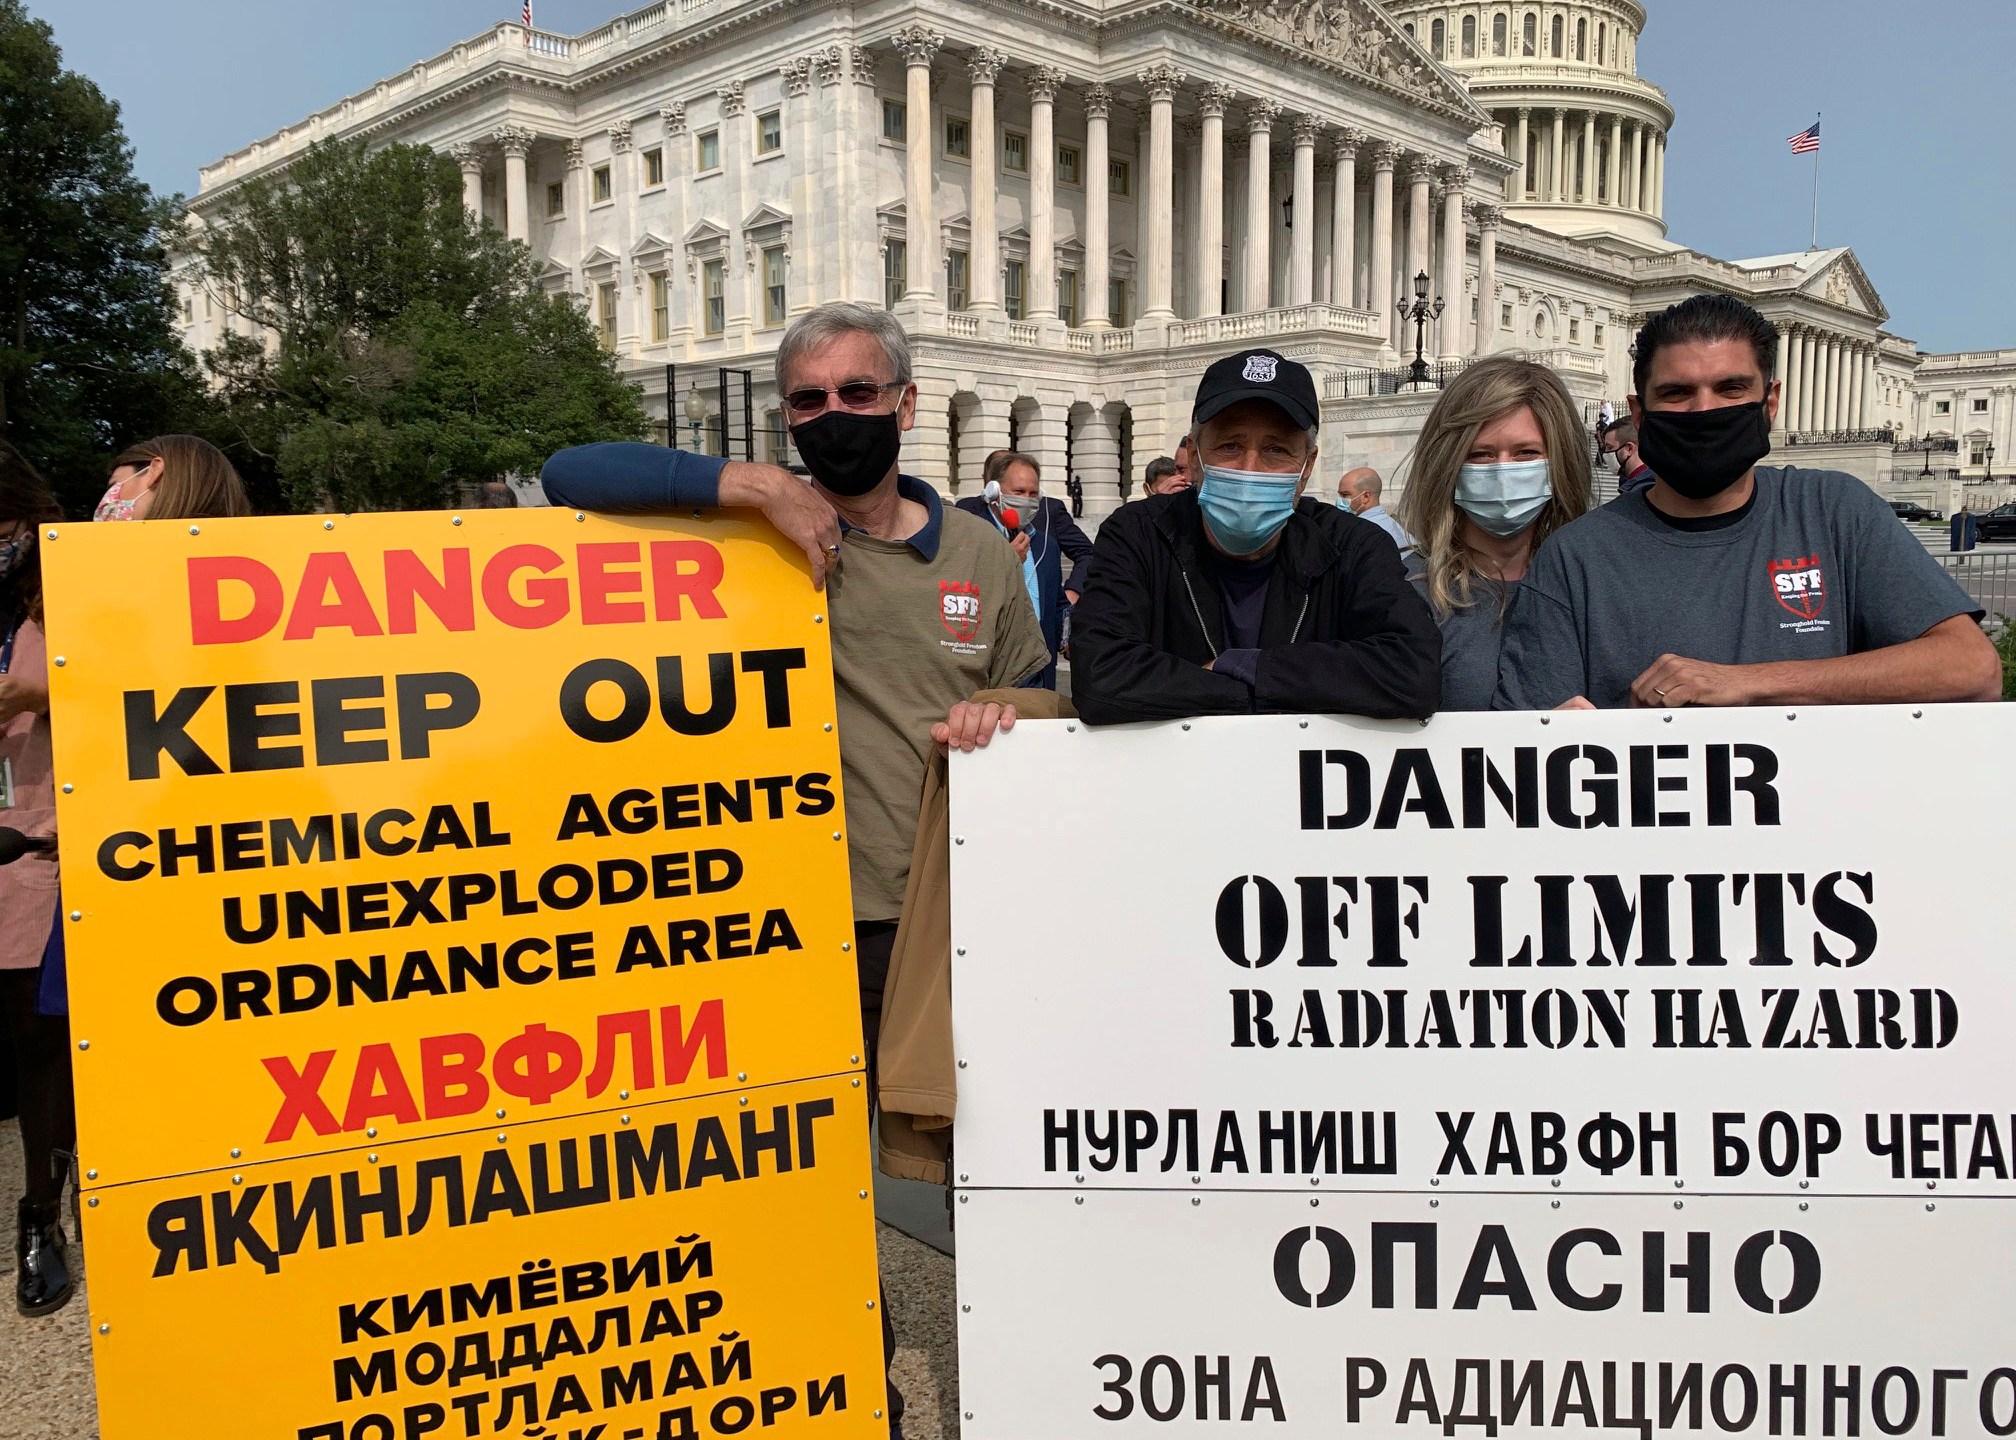 This image provided by Tara Copp shows Jon Stewart, host of "The Daily Show," third from right, as he stands with veterans and replica warning signs from K2, a former U.S. special operations base in Uzbekistan that was contaminated with the old Soviet chemical and nuclear weapons remnants, in front of the U.S. Capitol in 2020. Stewart began working with K2 veterans as part of his larger effort to get service members care for the toxic exposure-linked illnesses they got from their deployments during the wars in Iraq and Afghanistan. (Tara Copp via AP)